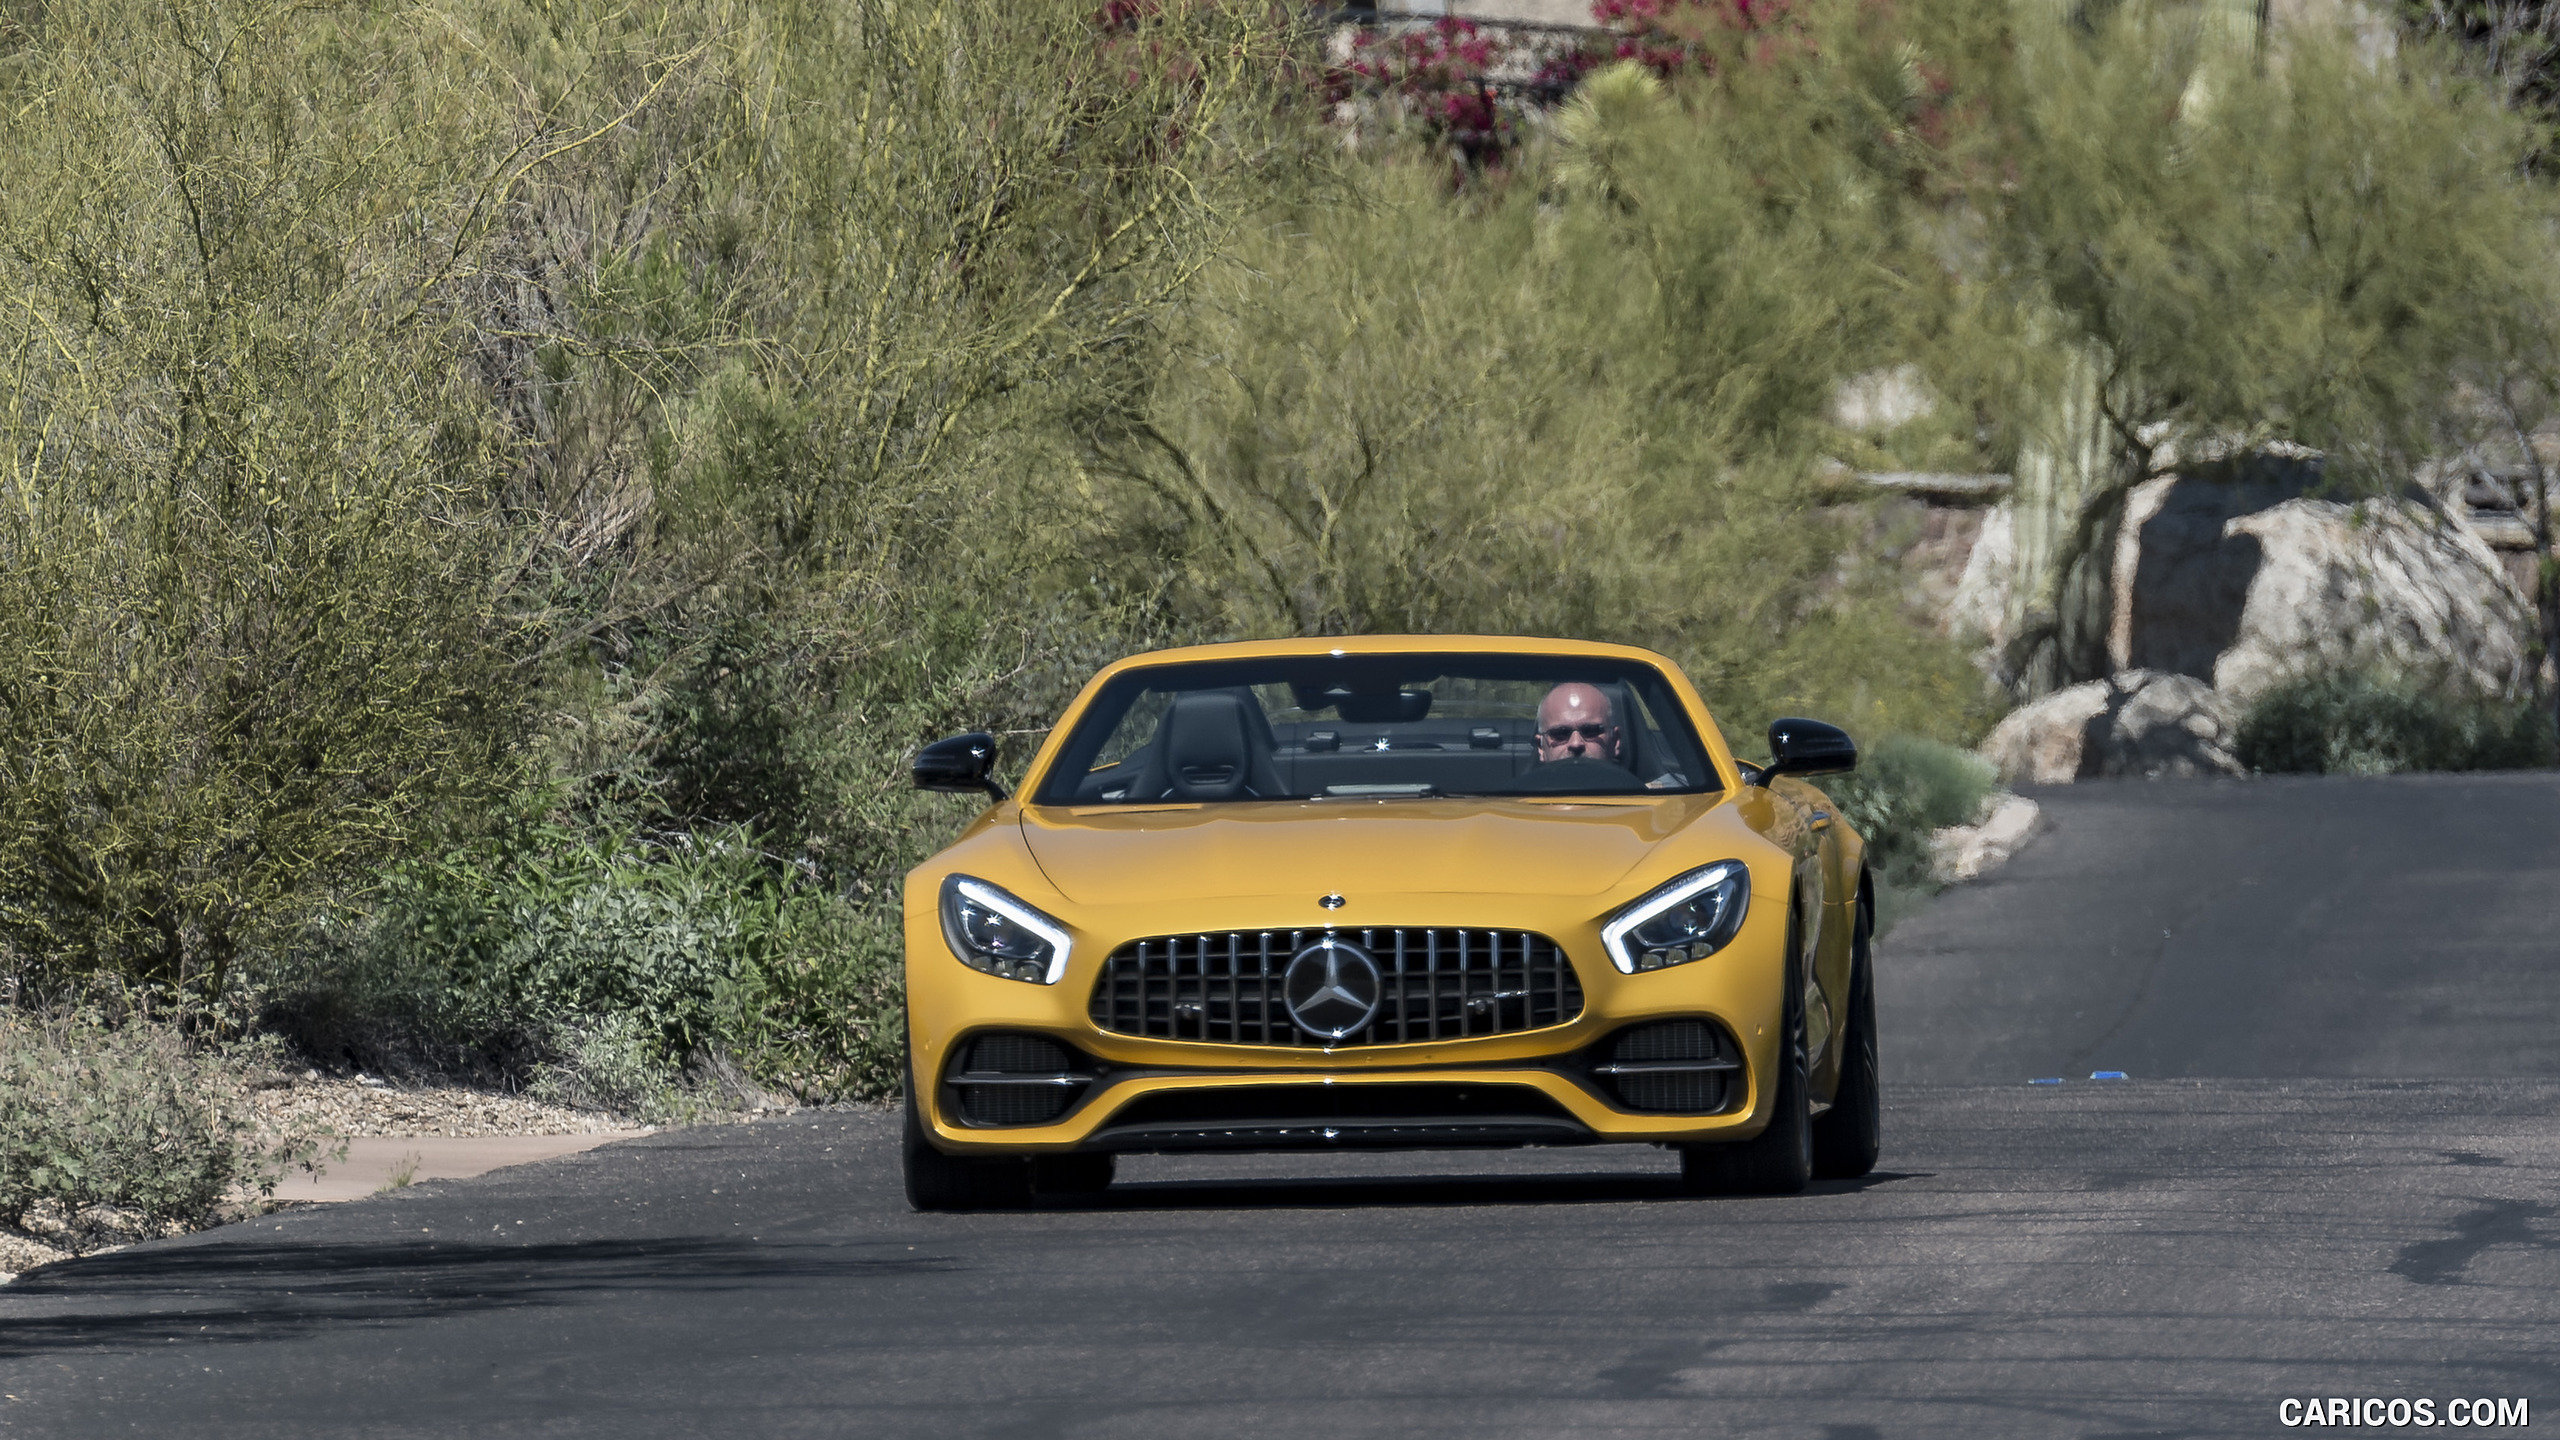 2018 Mercedes-AMG GT C Roadster - Front, #240 of 350